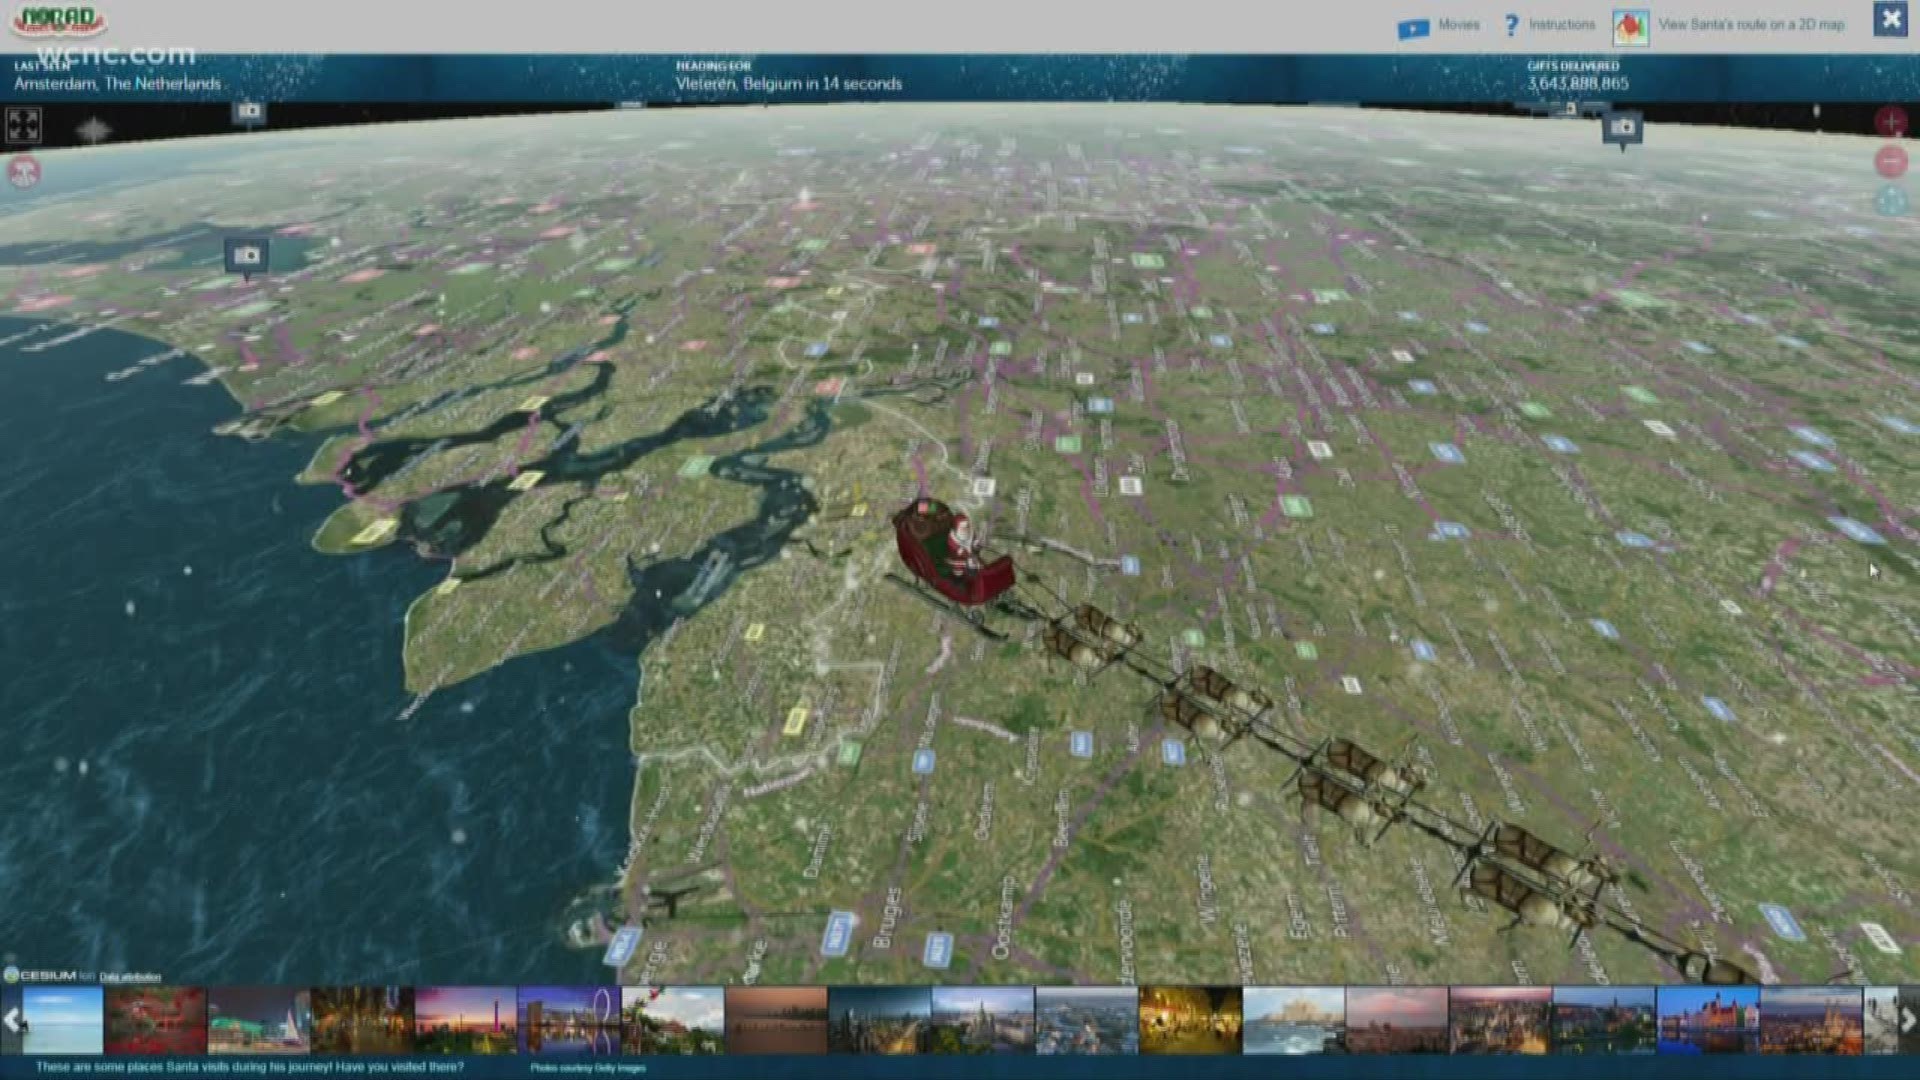 Santa is making his way around the world, delivering gifts to kids for Christmas.